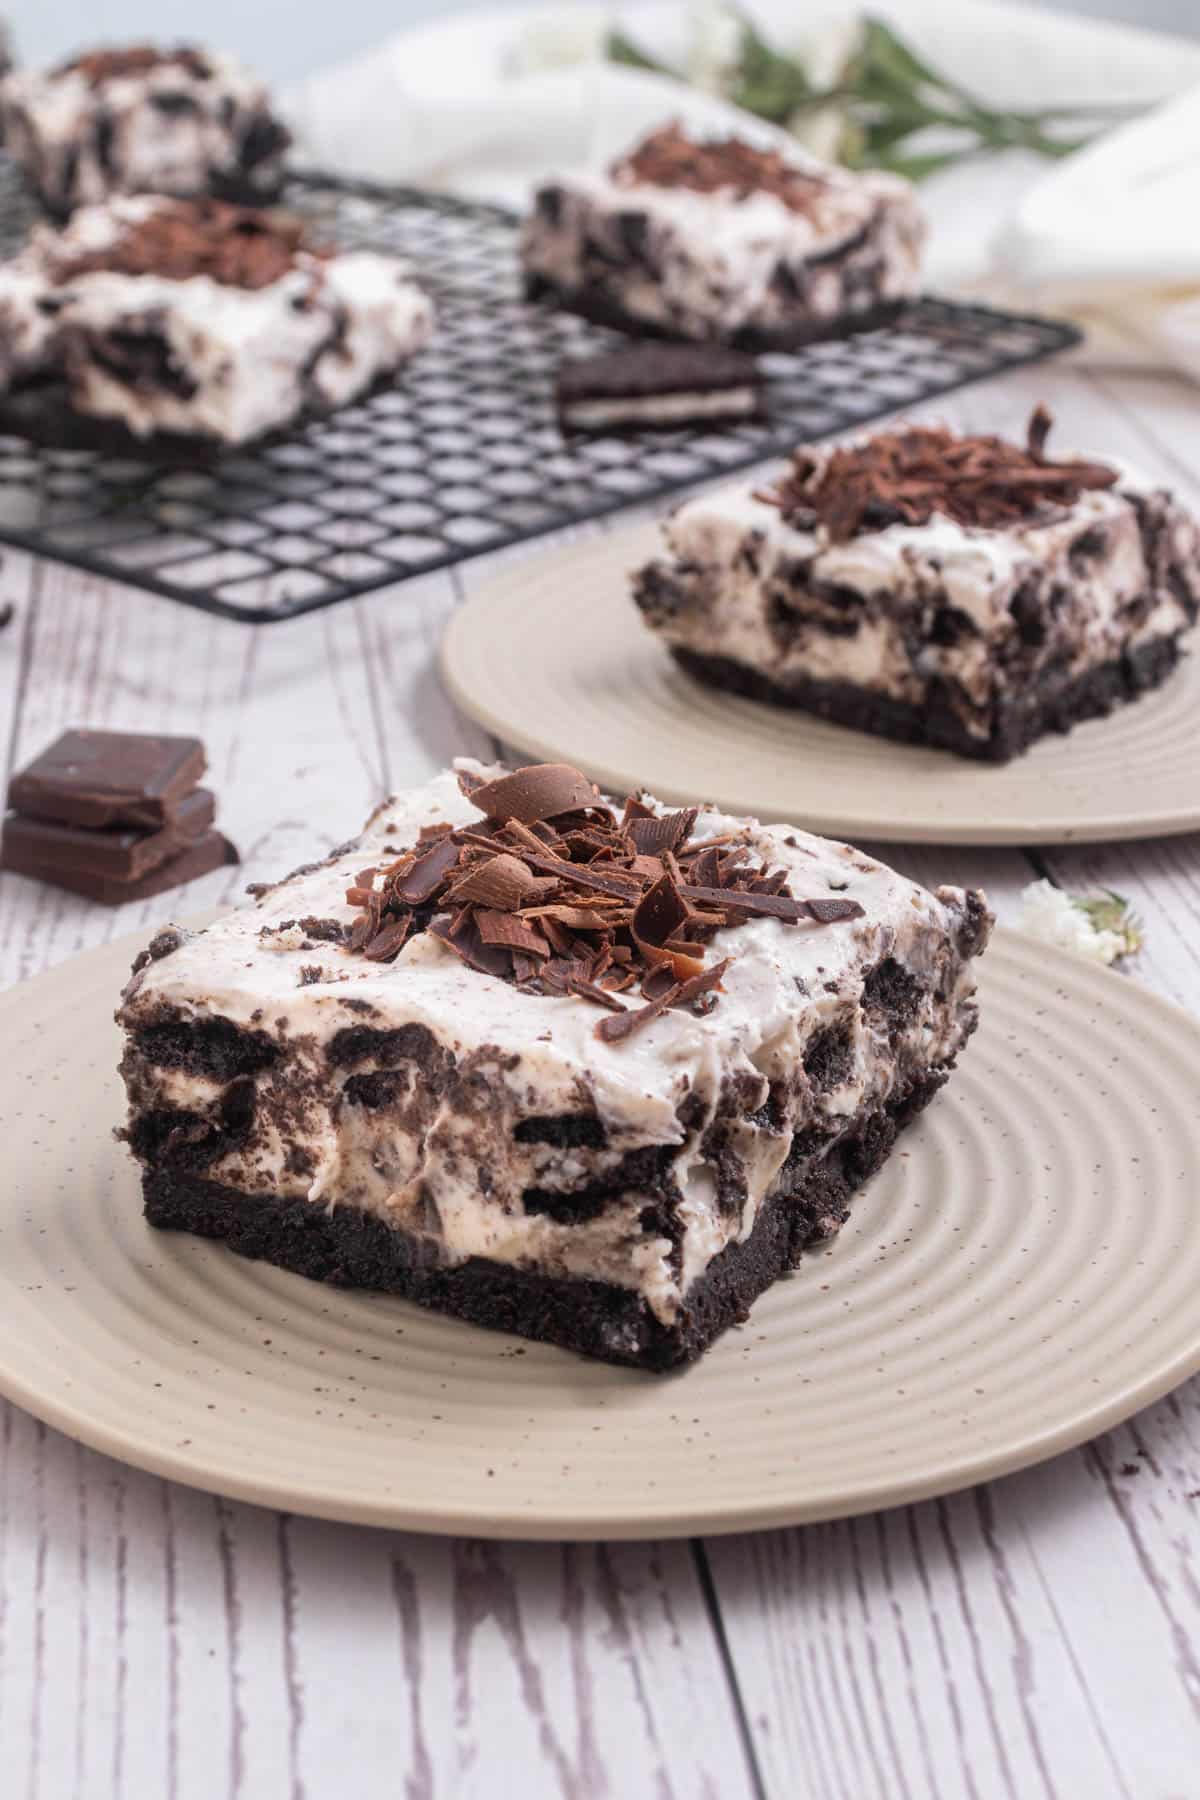 Oreo cheesecake bar on a white plate with more cheesecake in background.